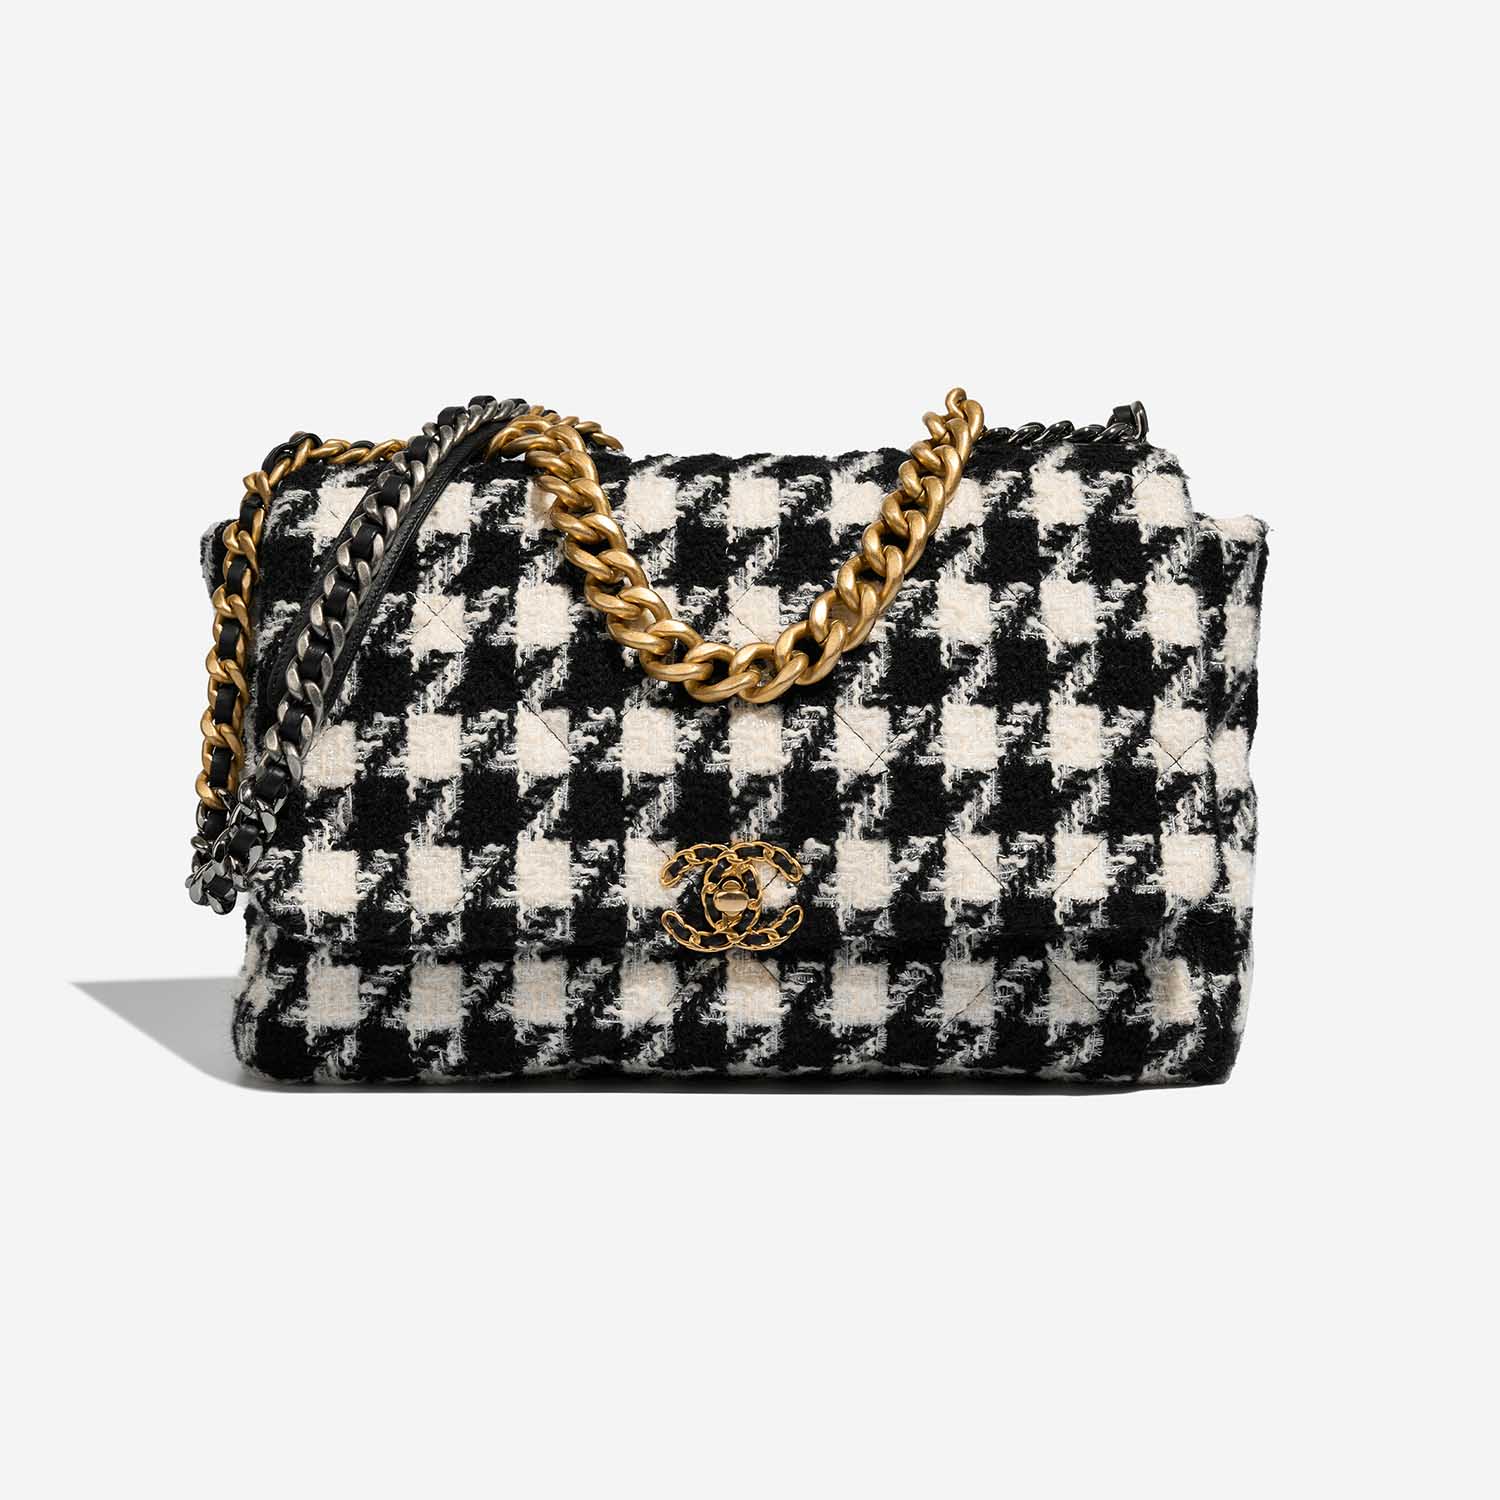 black and white chanel bag